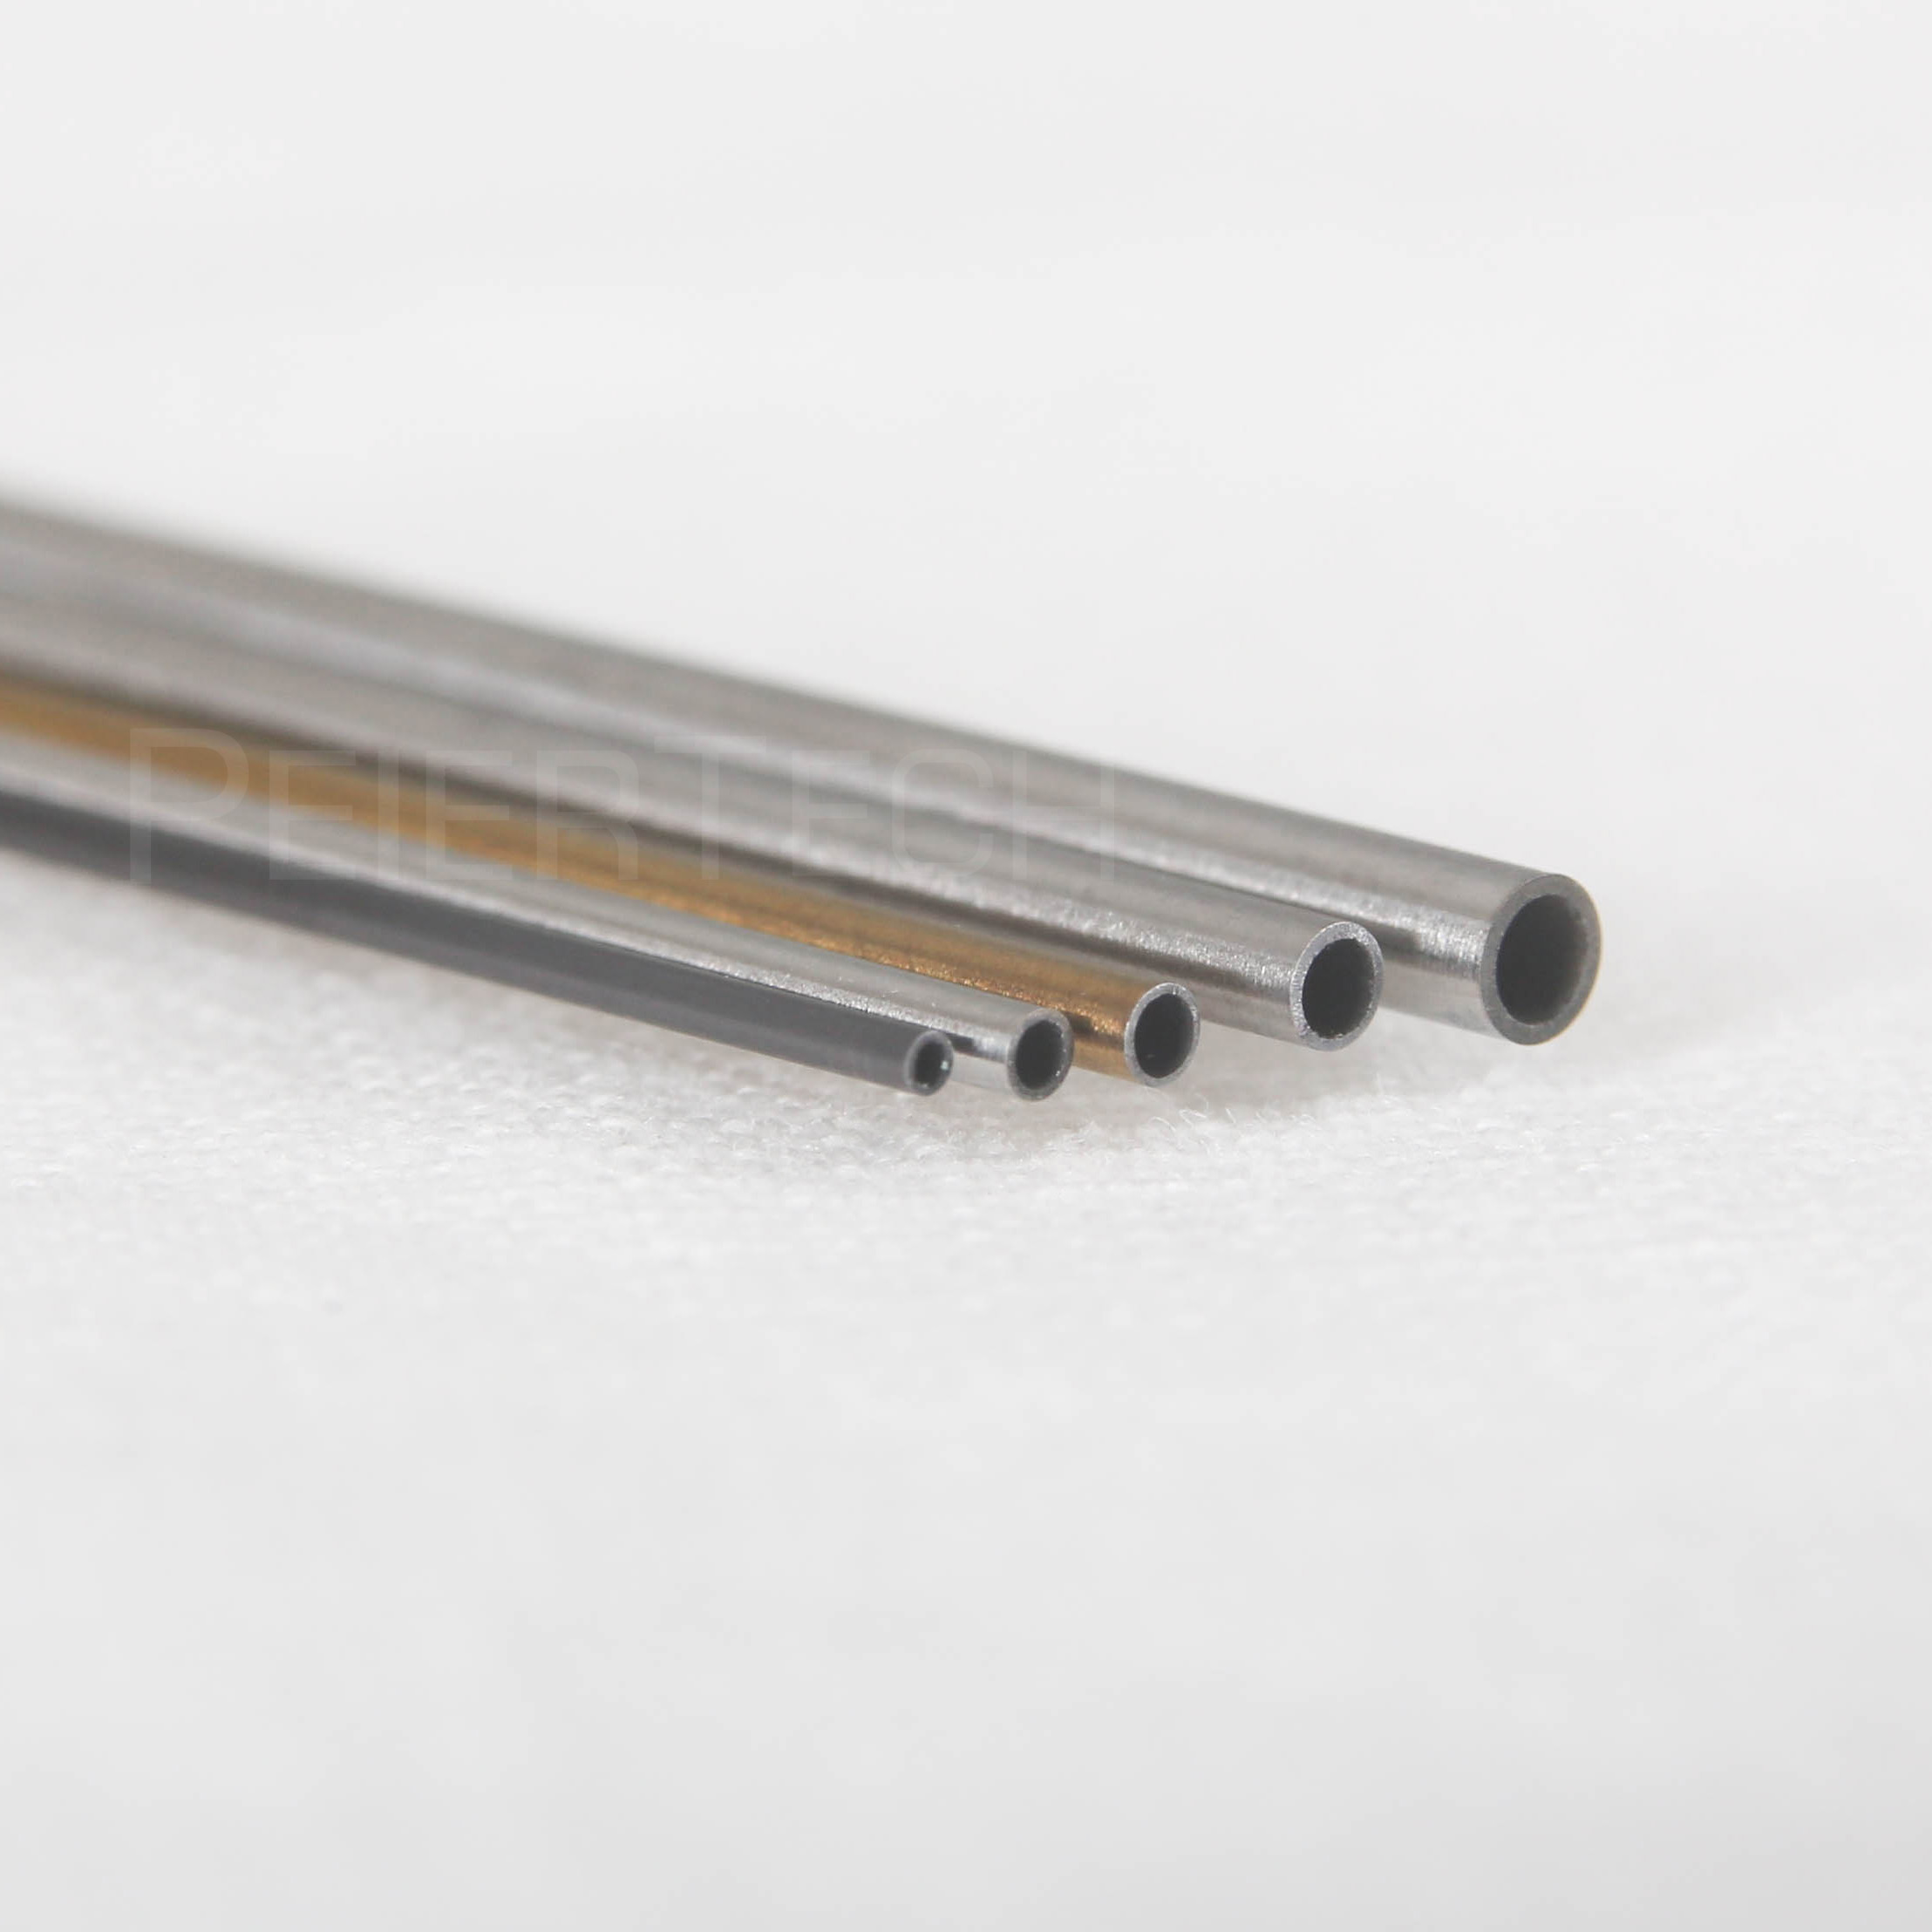 Nitinol Tube ASTM F2633-13 Wrought Seamless NiTi Superelastic Tube for Medical Device and Implants